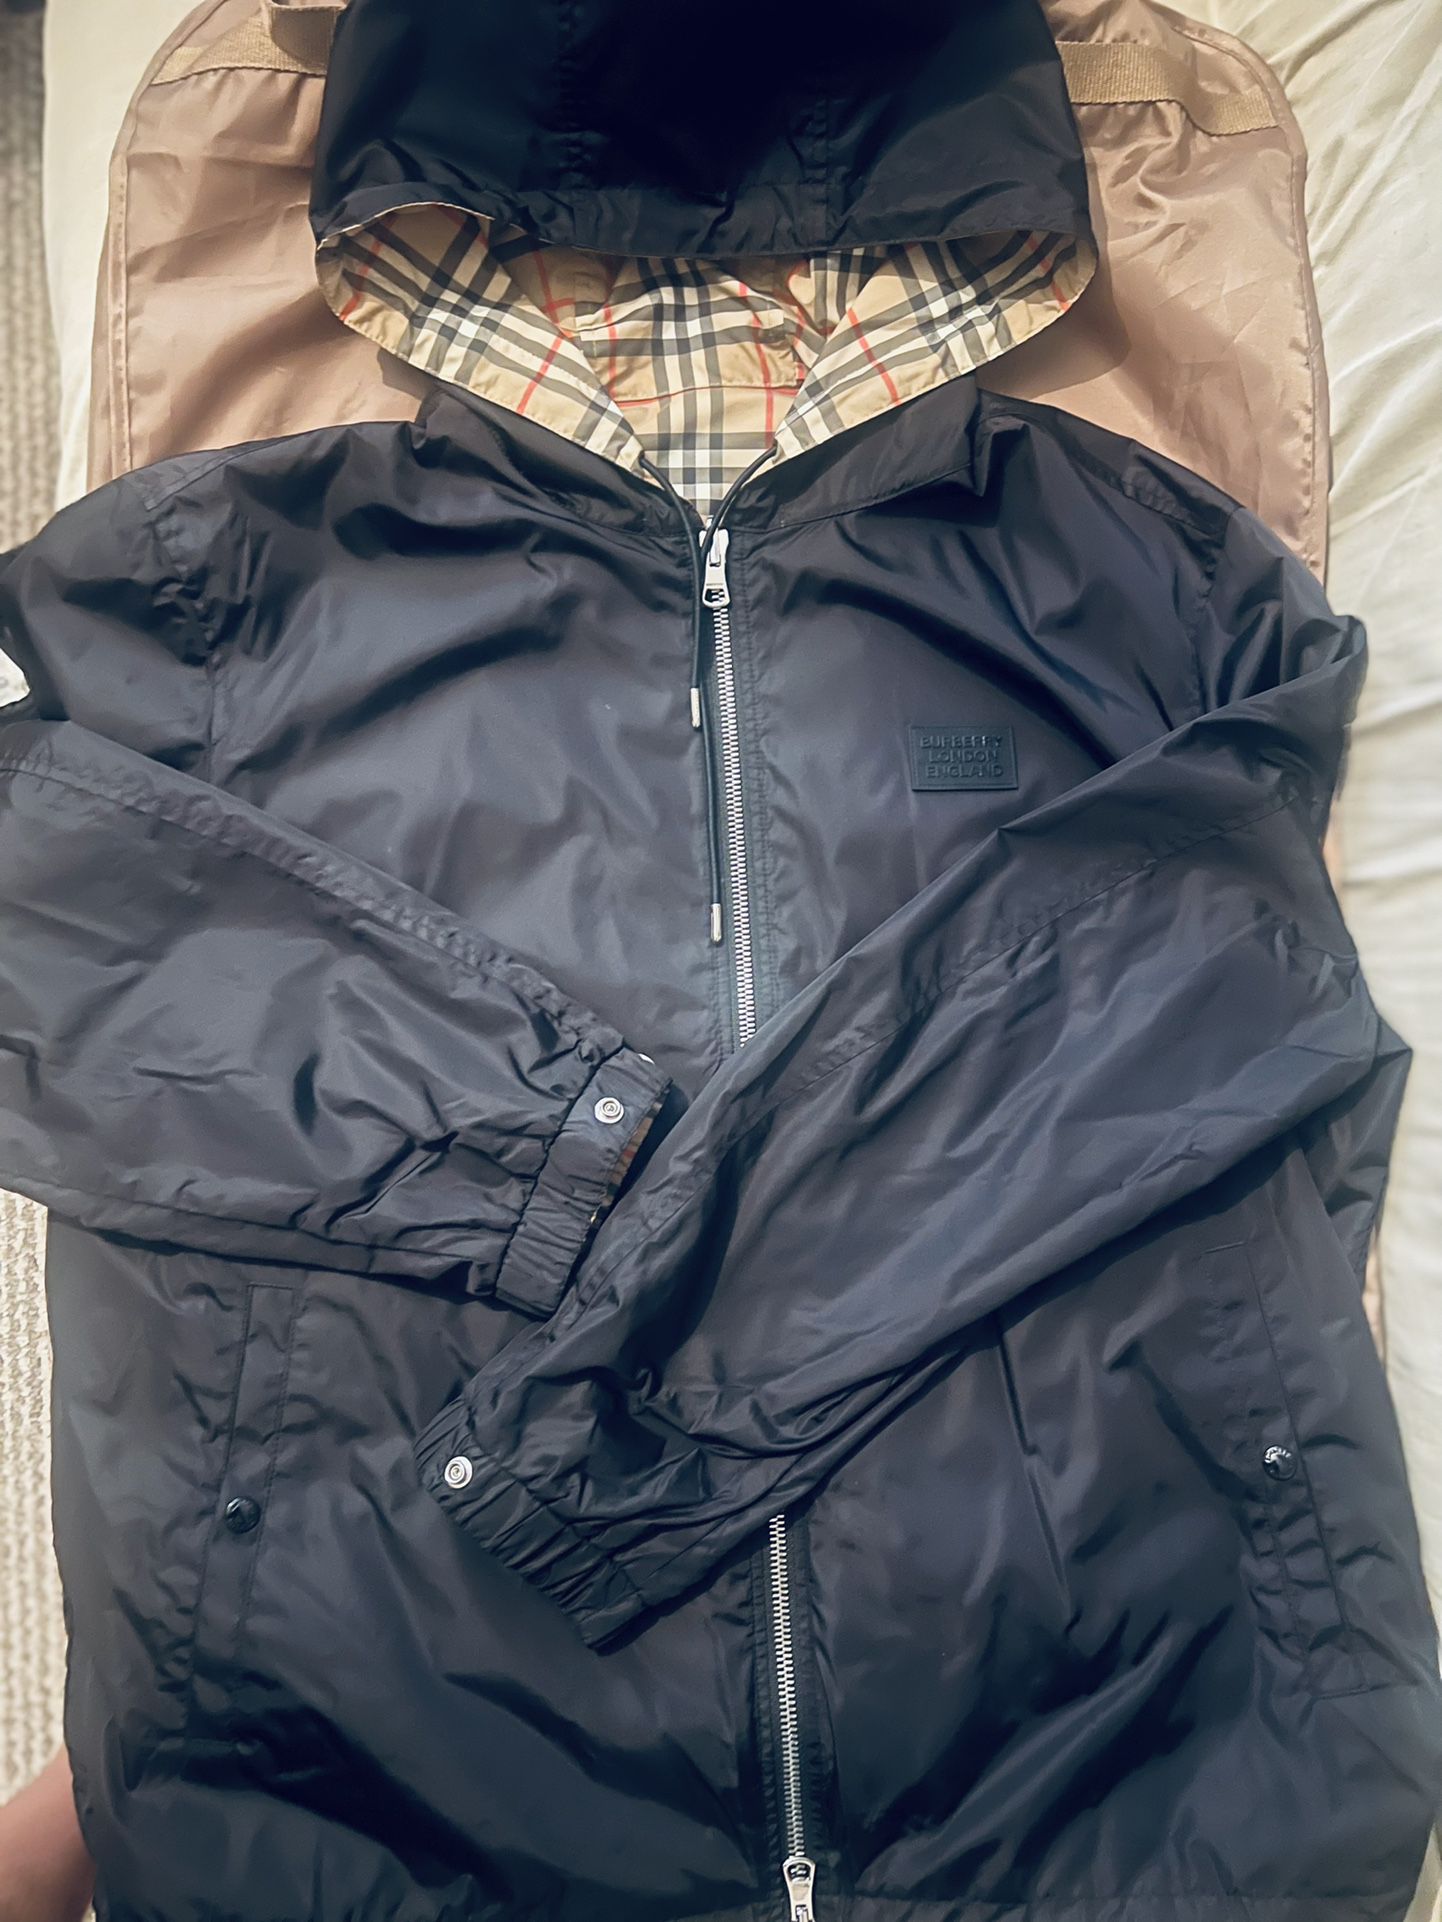 Vintage Burberry Trench Coat for Sale in Charlotte, NC - OfferUp